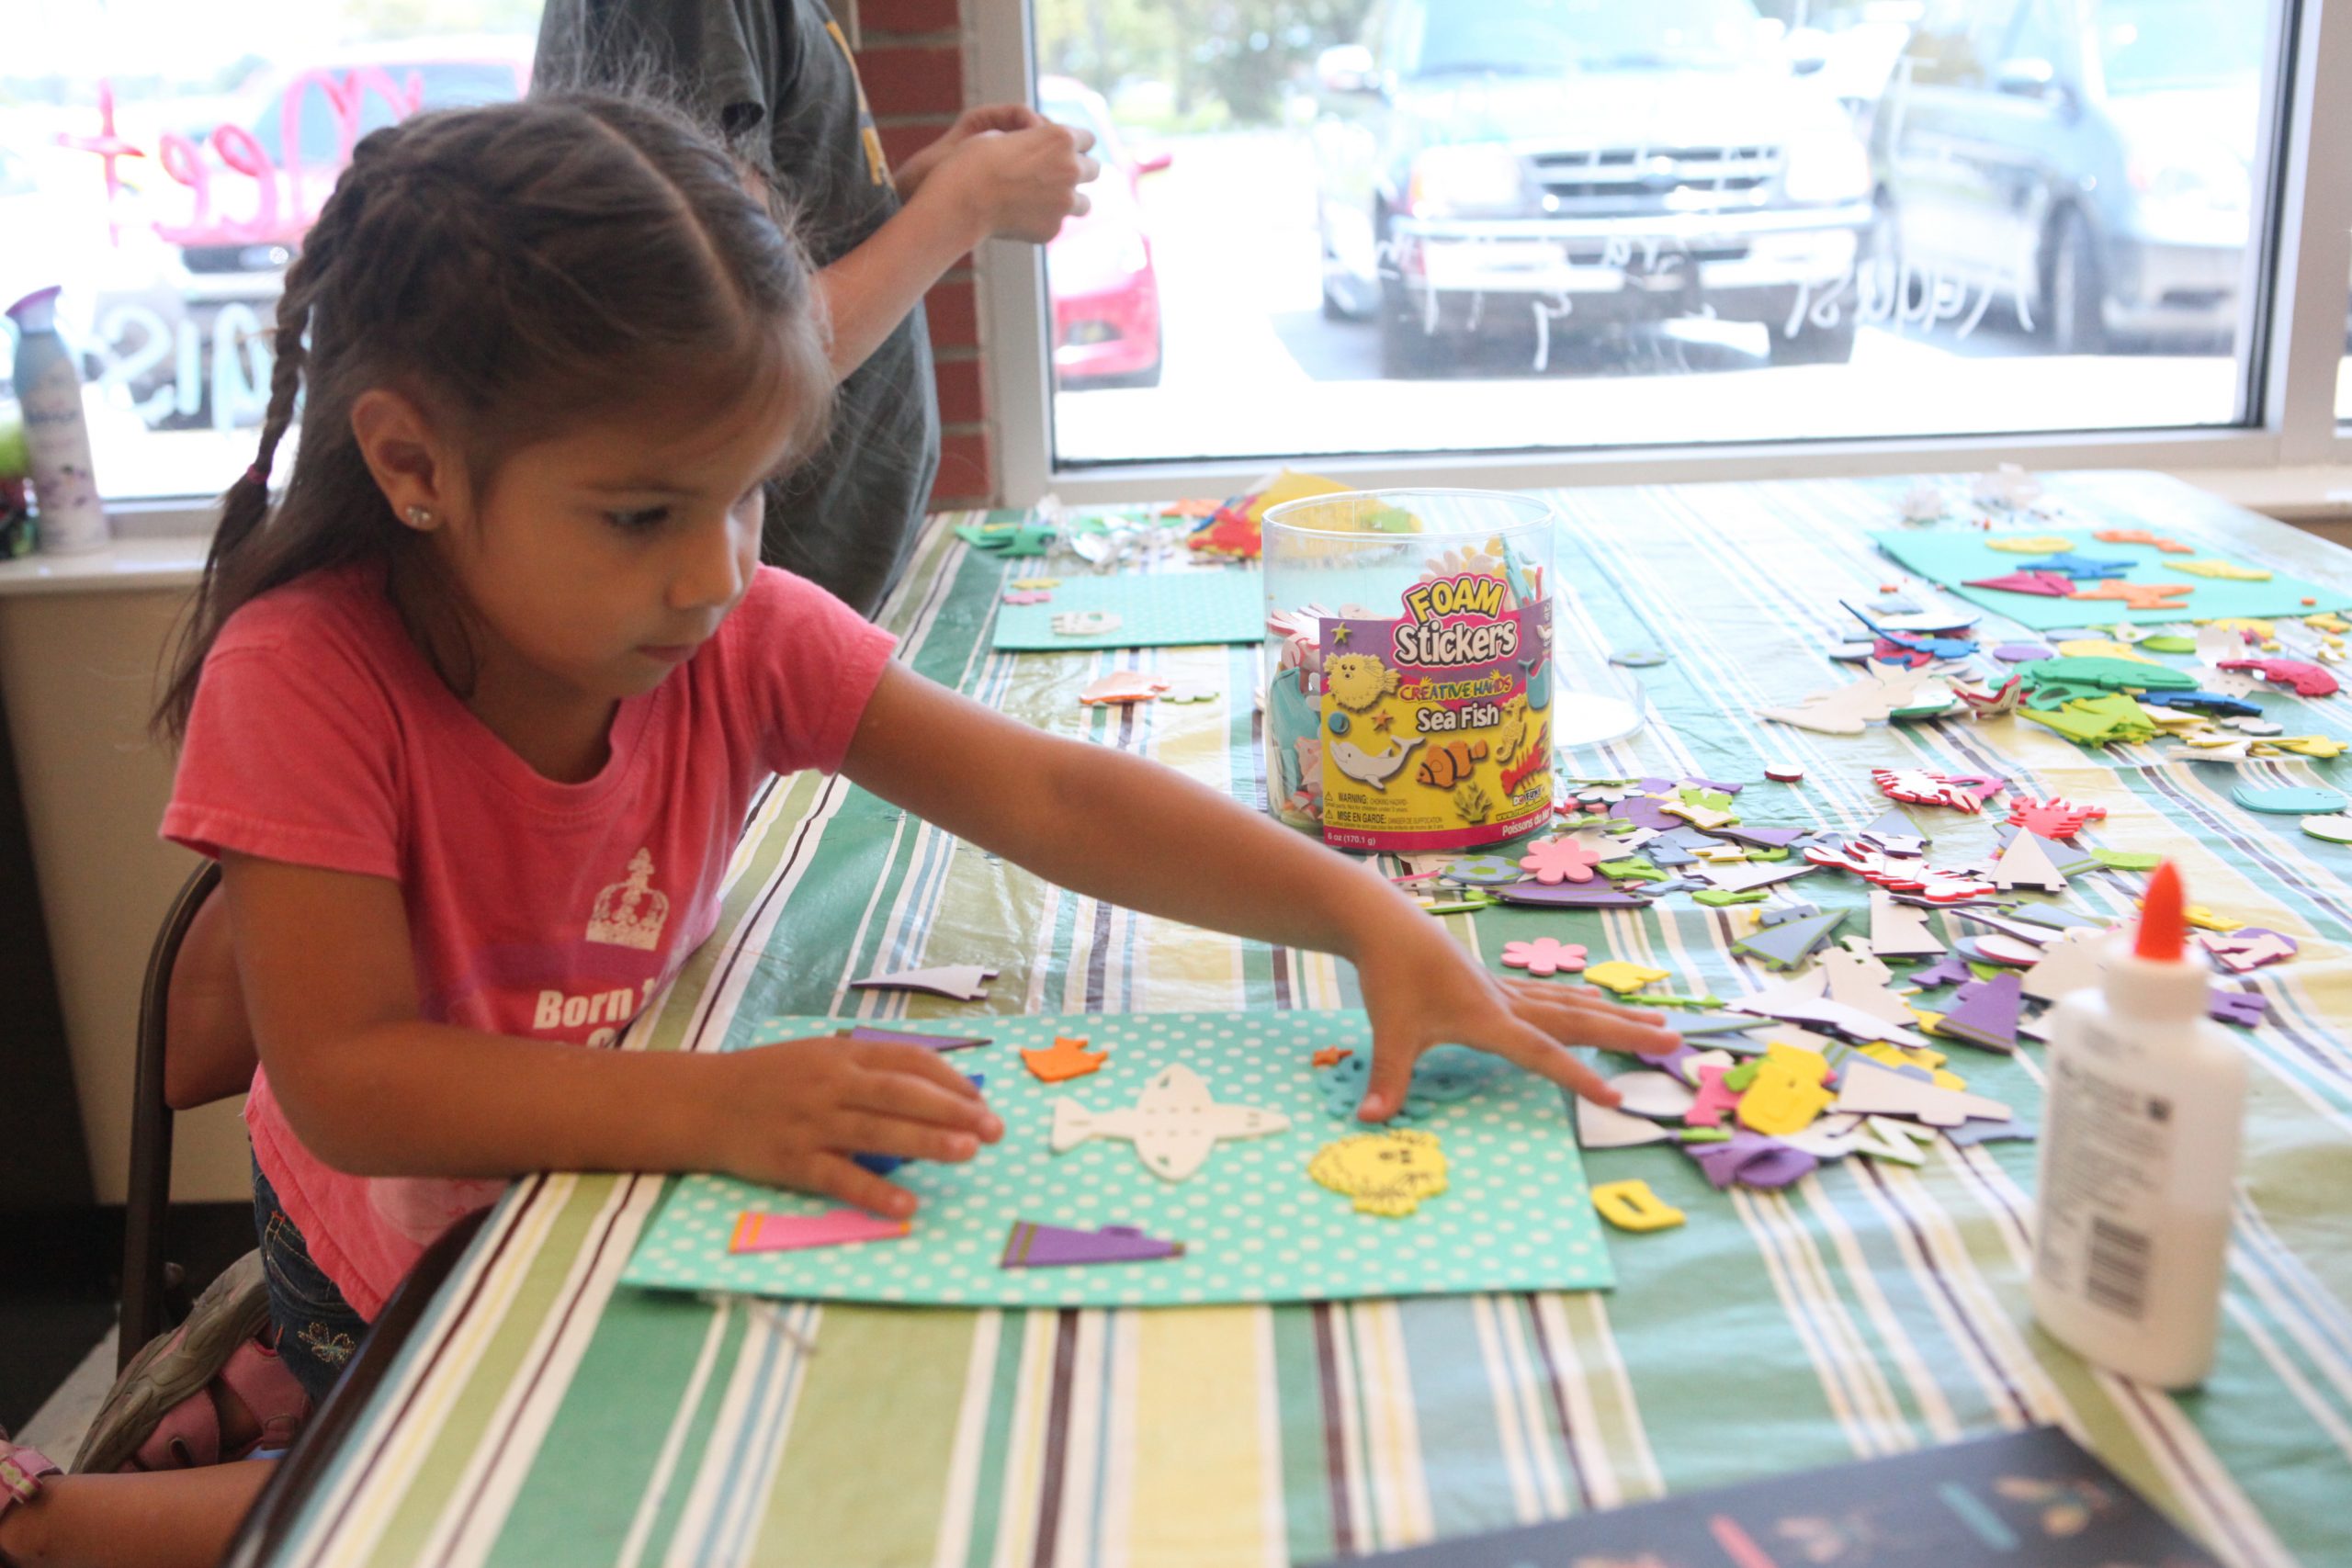 Camille, a military dependent, works on her art project during the Summer Kids Club hosted by the Armed Services YMCA aboard Marine Corps Base Camp Lejeune’s Tarawa Terrace residential area July 19. The youngsters were spellbound as they focused on creating masterpieces made of colorful foam cut-outs and an excessive amount of glue.